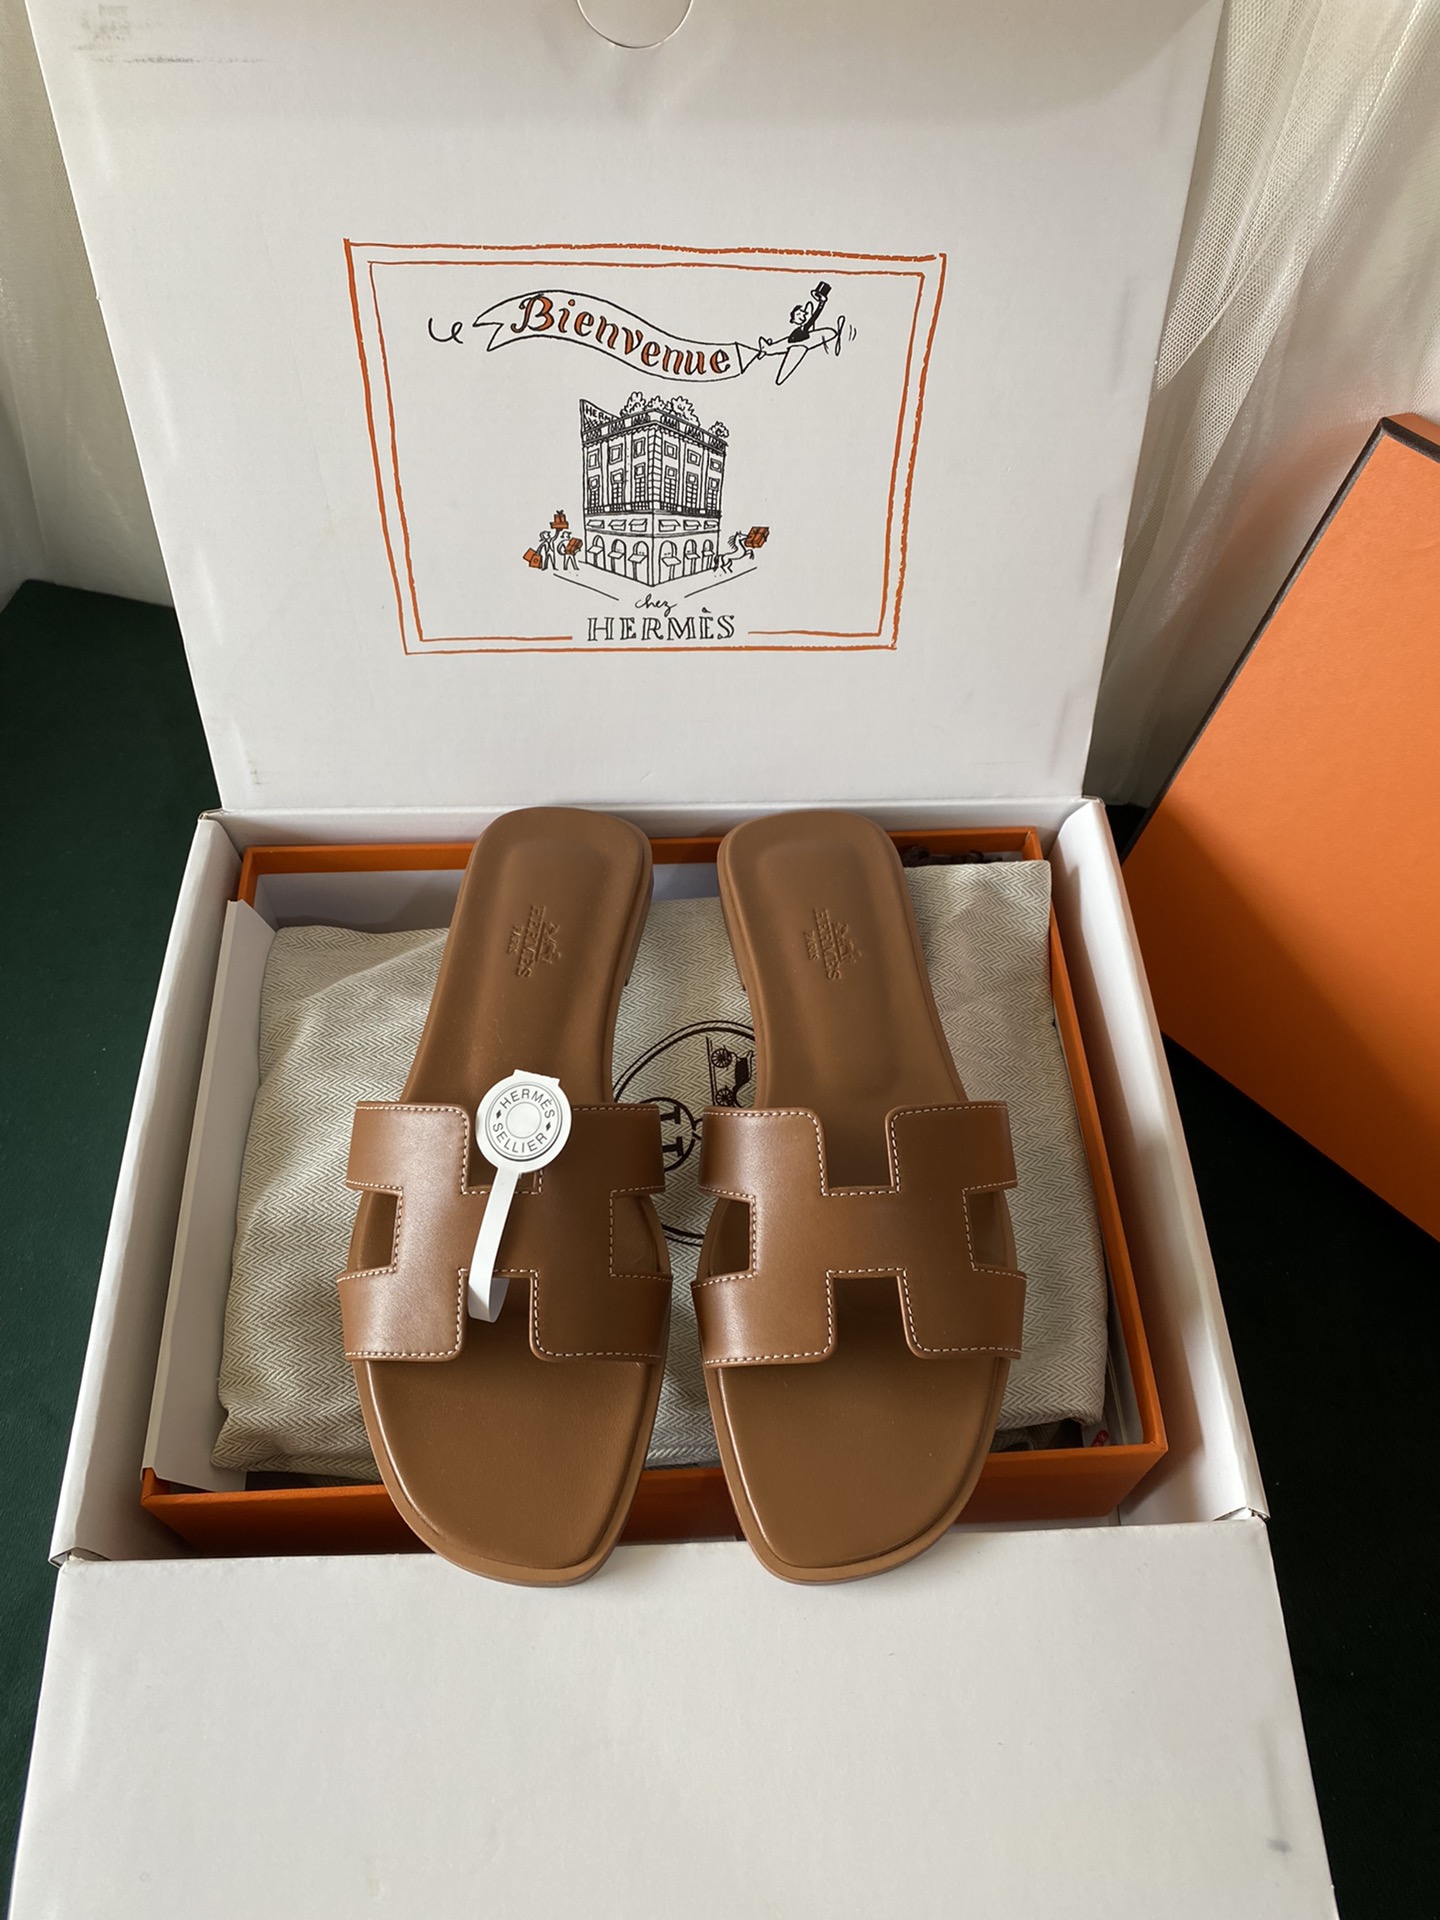 Hermes Shoes Slippers Buy the Best High Quality Replica